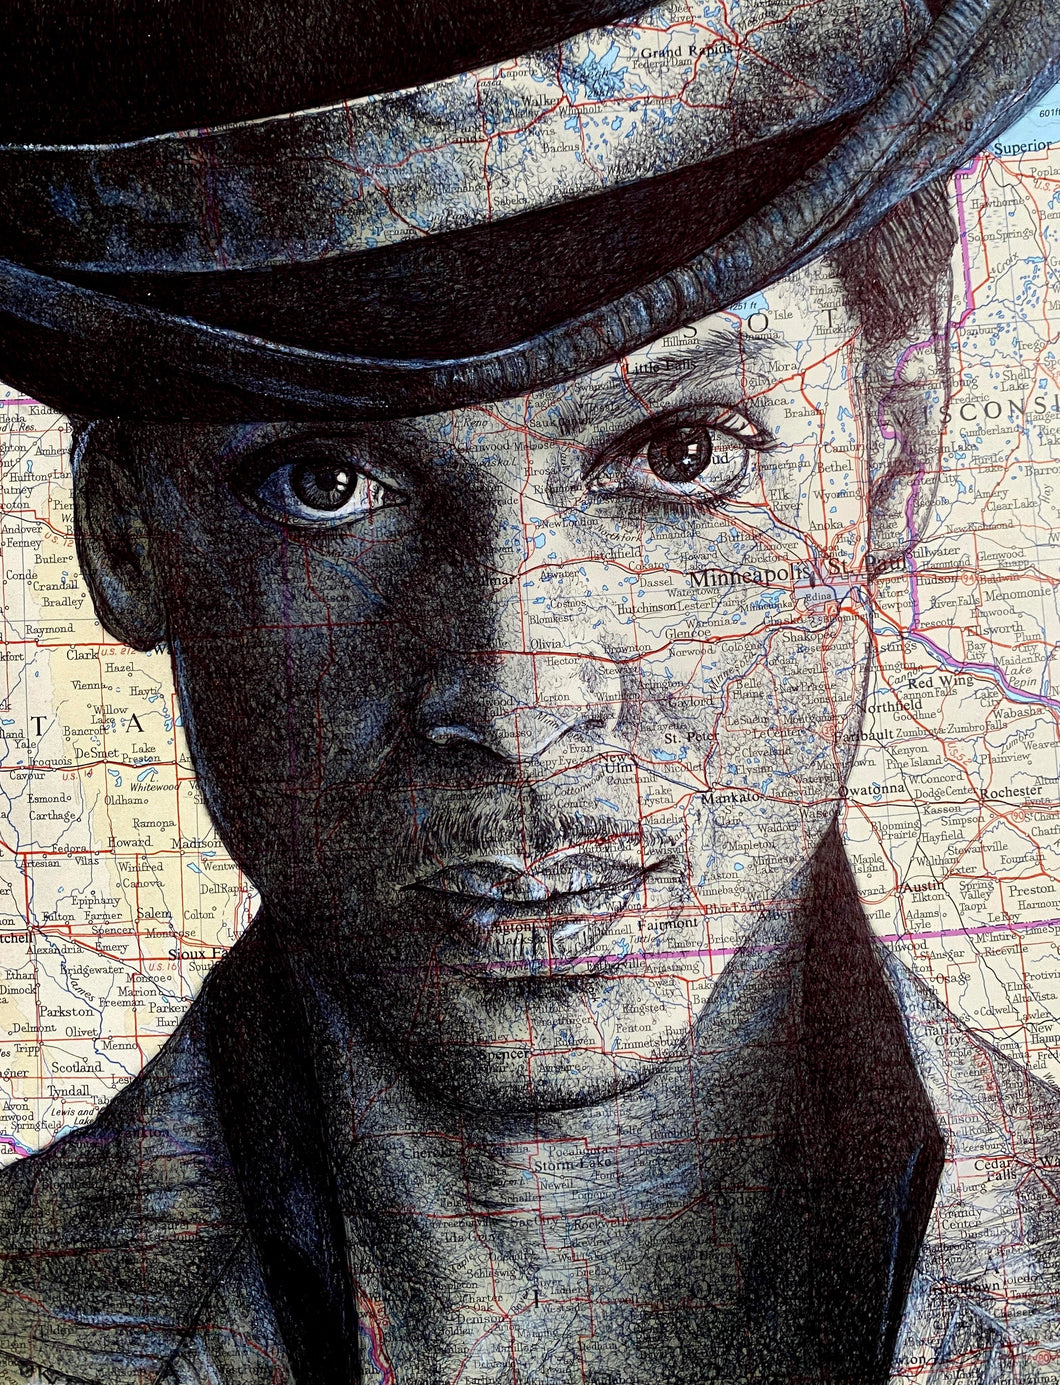 Prince Rogers Nelson Art Print. Pen Drawing Over Map of Minneapolis. A4 Unframed